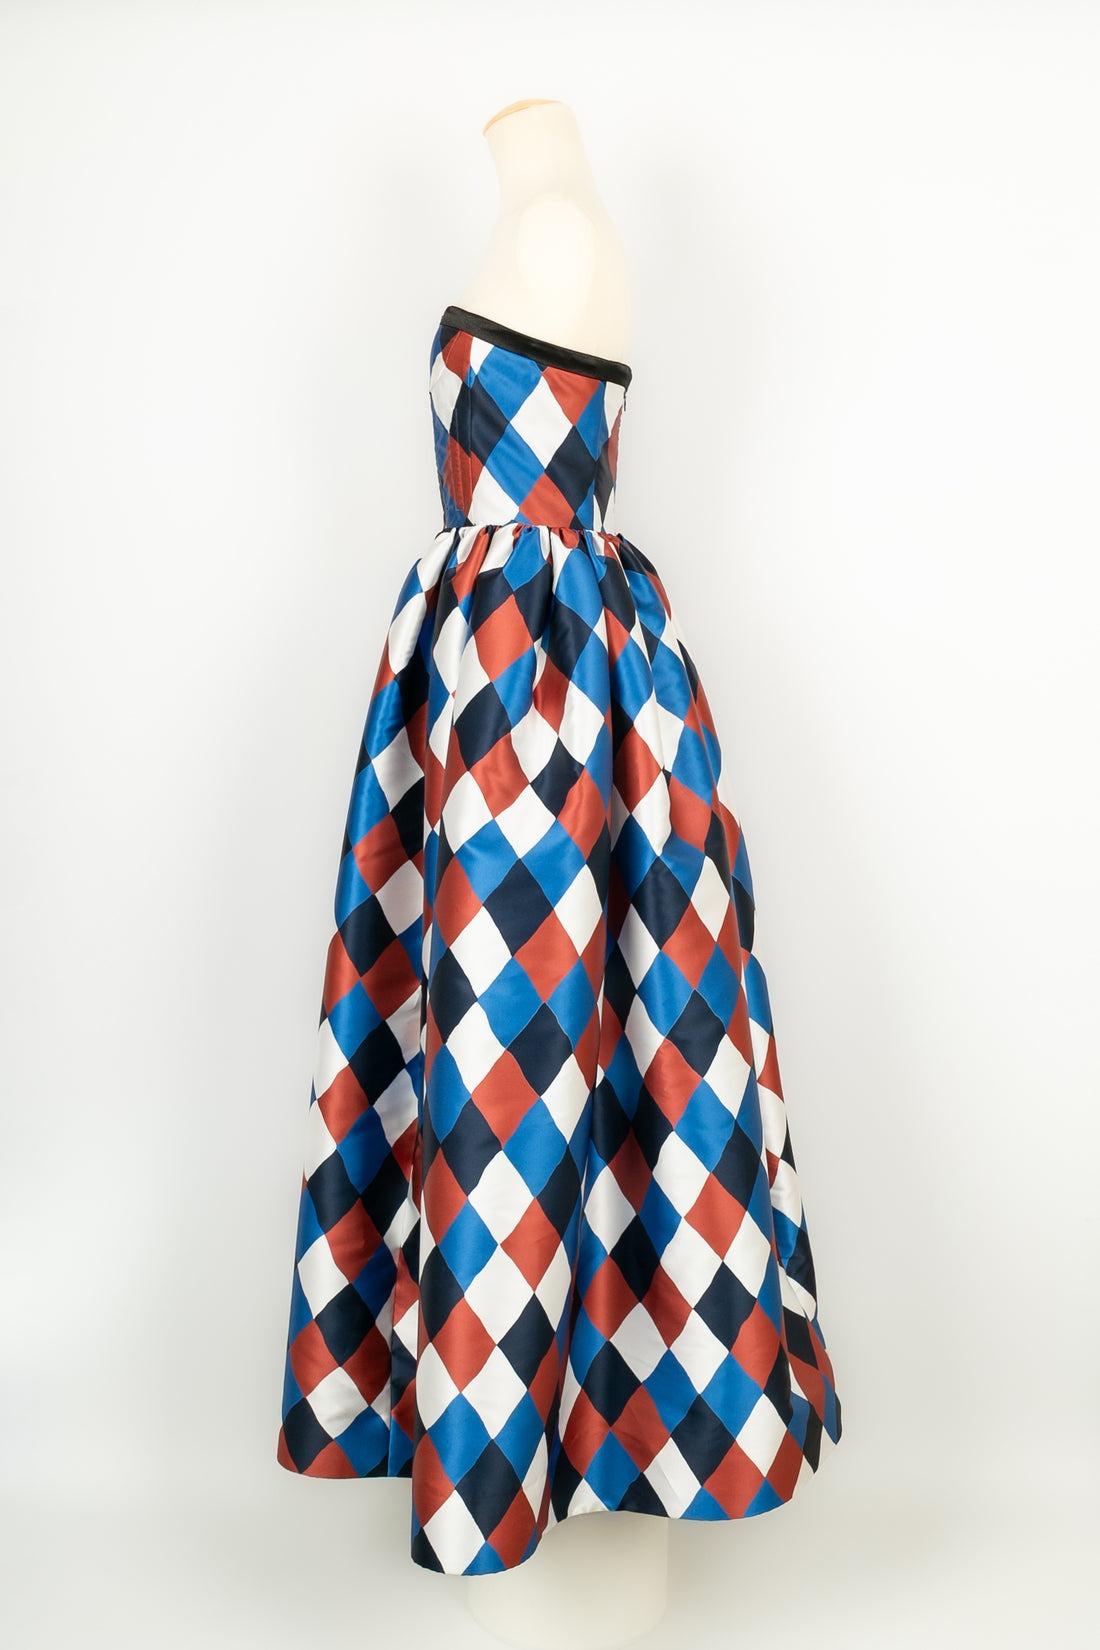 Lanvin - Long dress with harlequin patterns in red, white, light blue, and navy blue tones. Size 36FR.

Additiional information:
Condition: Very good condition
Dimensions: Chest: 44 cm - Waist: 34 cm - Length: 137 cm

Seller reference: VR245
